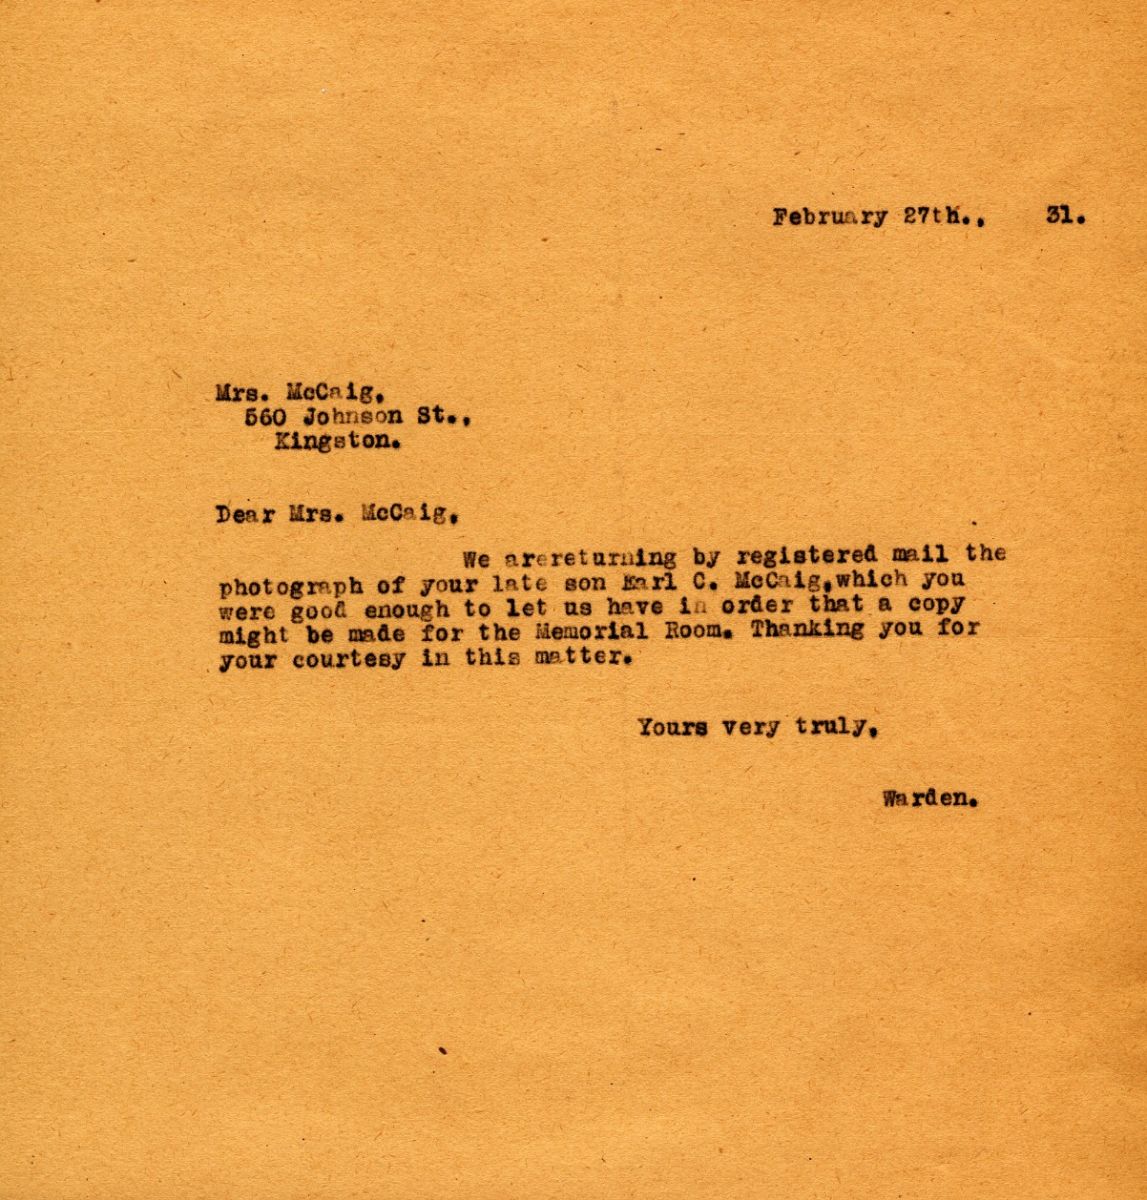 Letter from the Warden to Mrs. McCaig, 27th February 1931